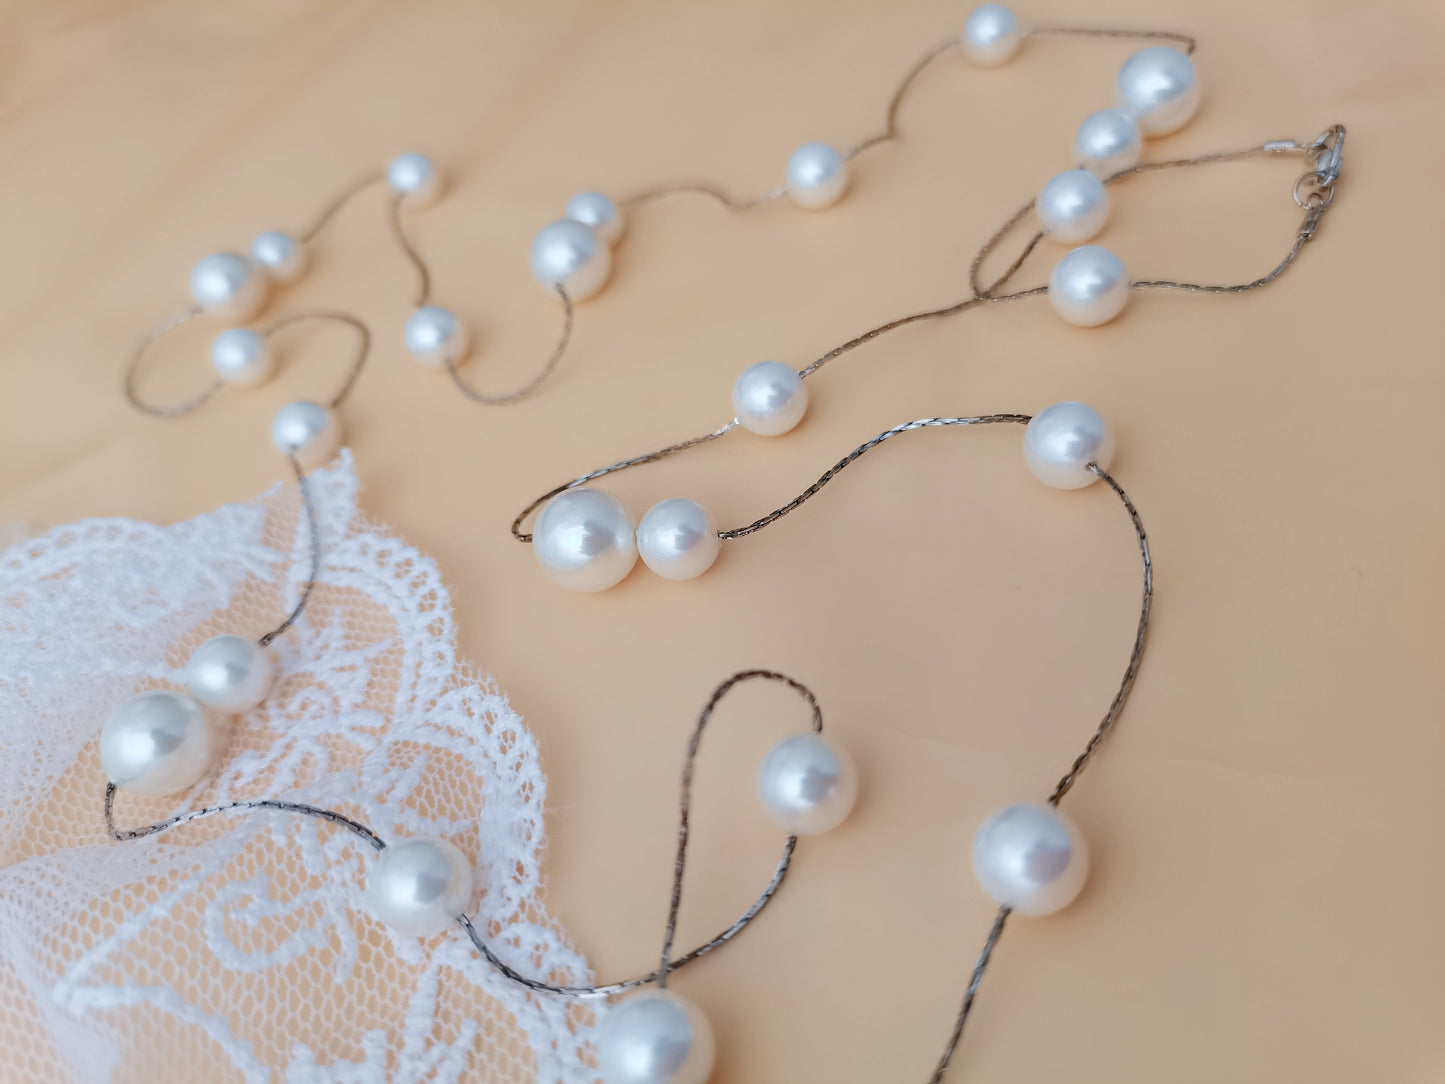 High Quality 8-10MM White Shell Pearl Long Necklace 38" South Sea Beaded Chain